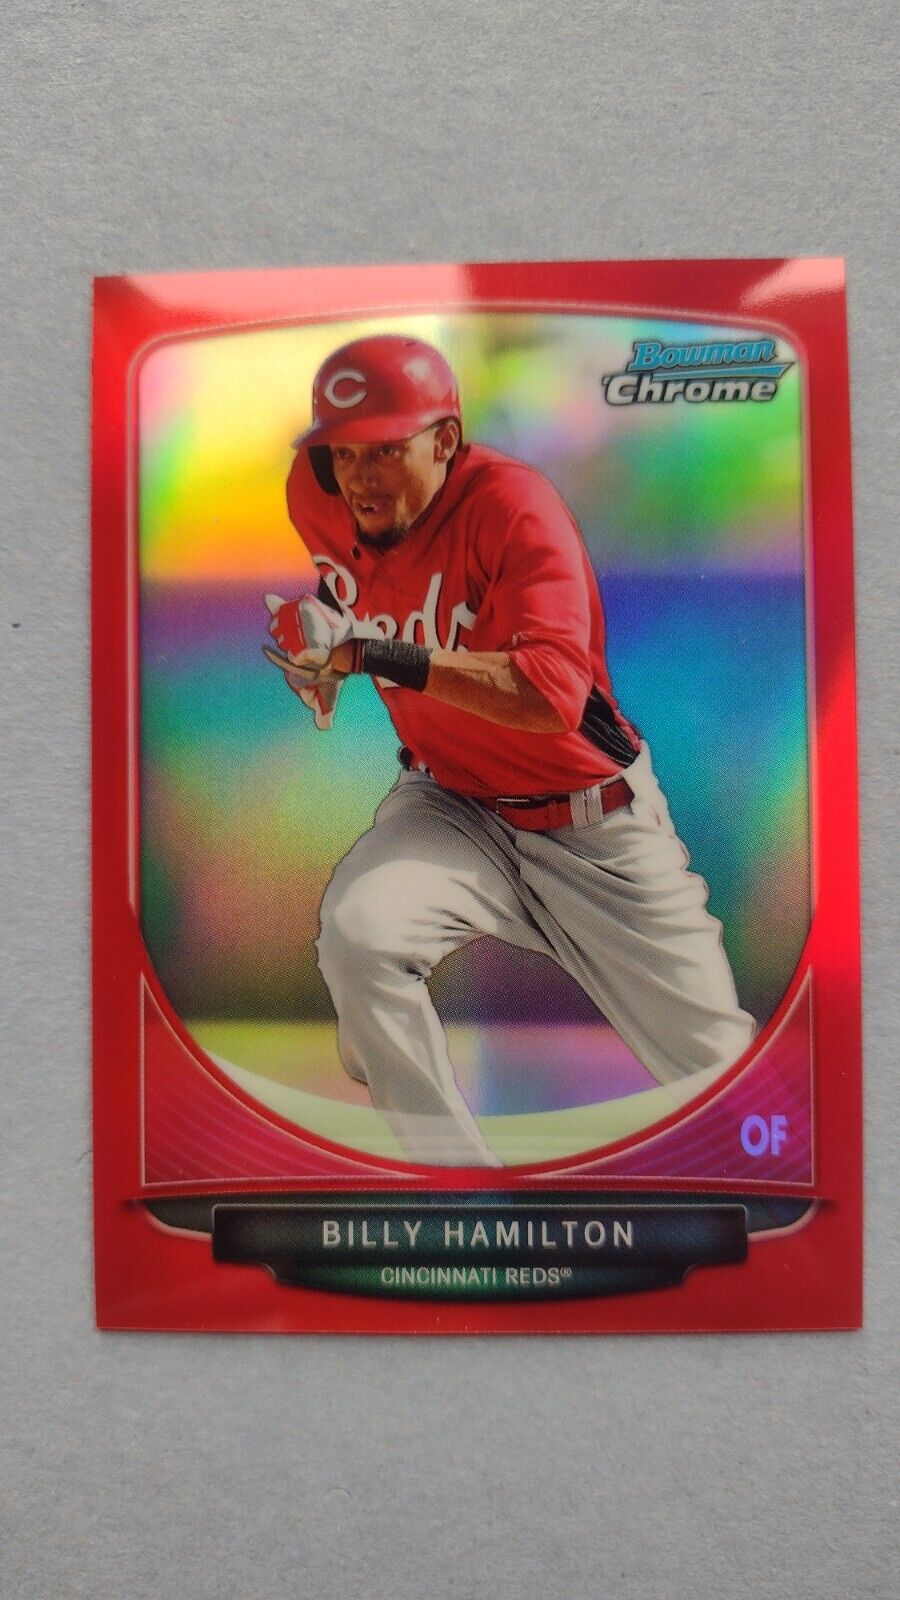 2013 Bowman Chrome Rookie Red Refractor Billy Hamilton 3/5